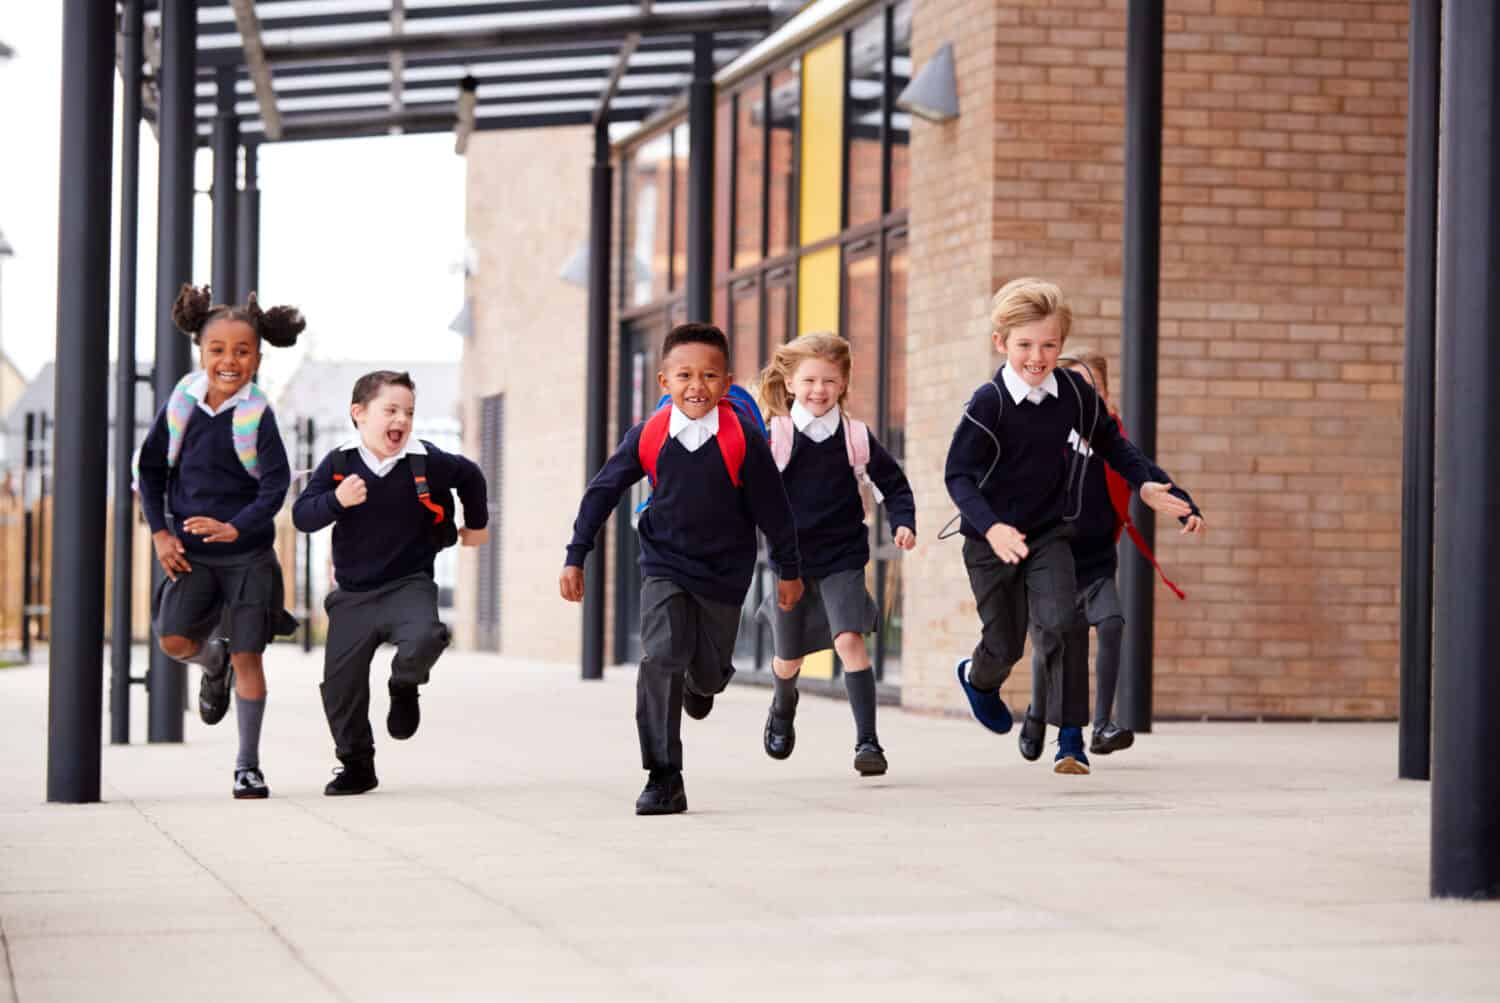 Primary school kids, wearing school uniforms and backpacks, running on a walkway outside their school building, front view